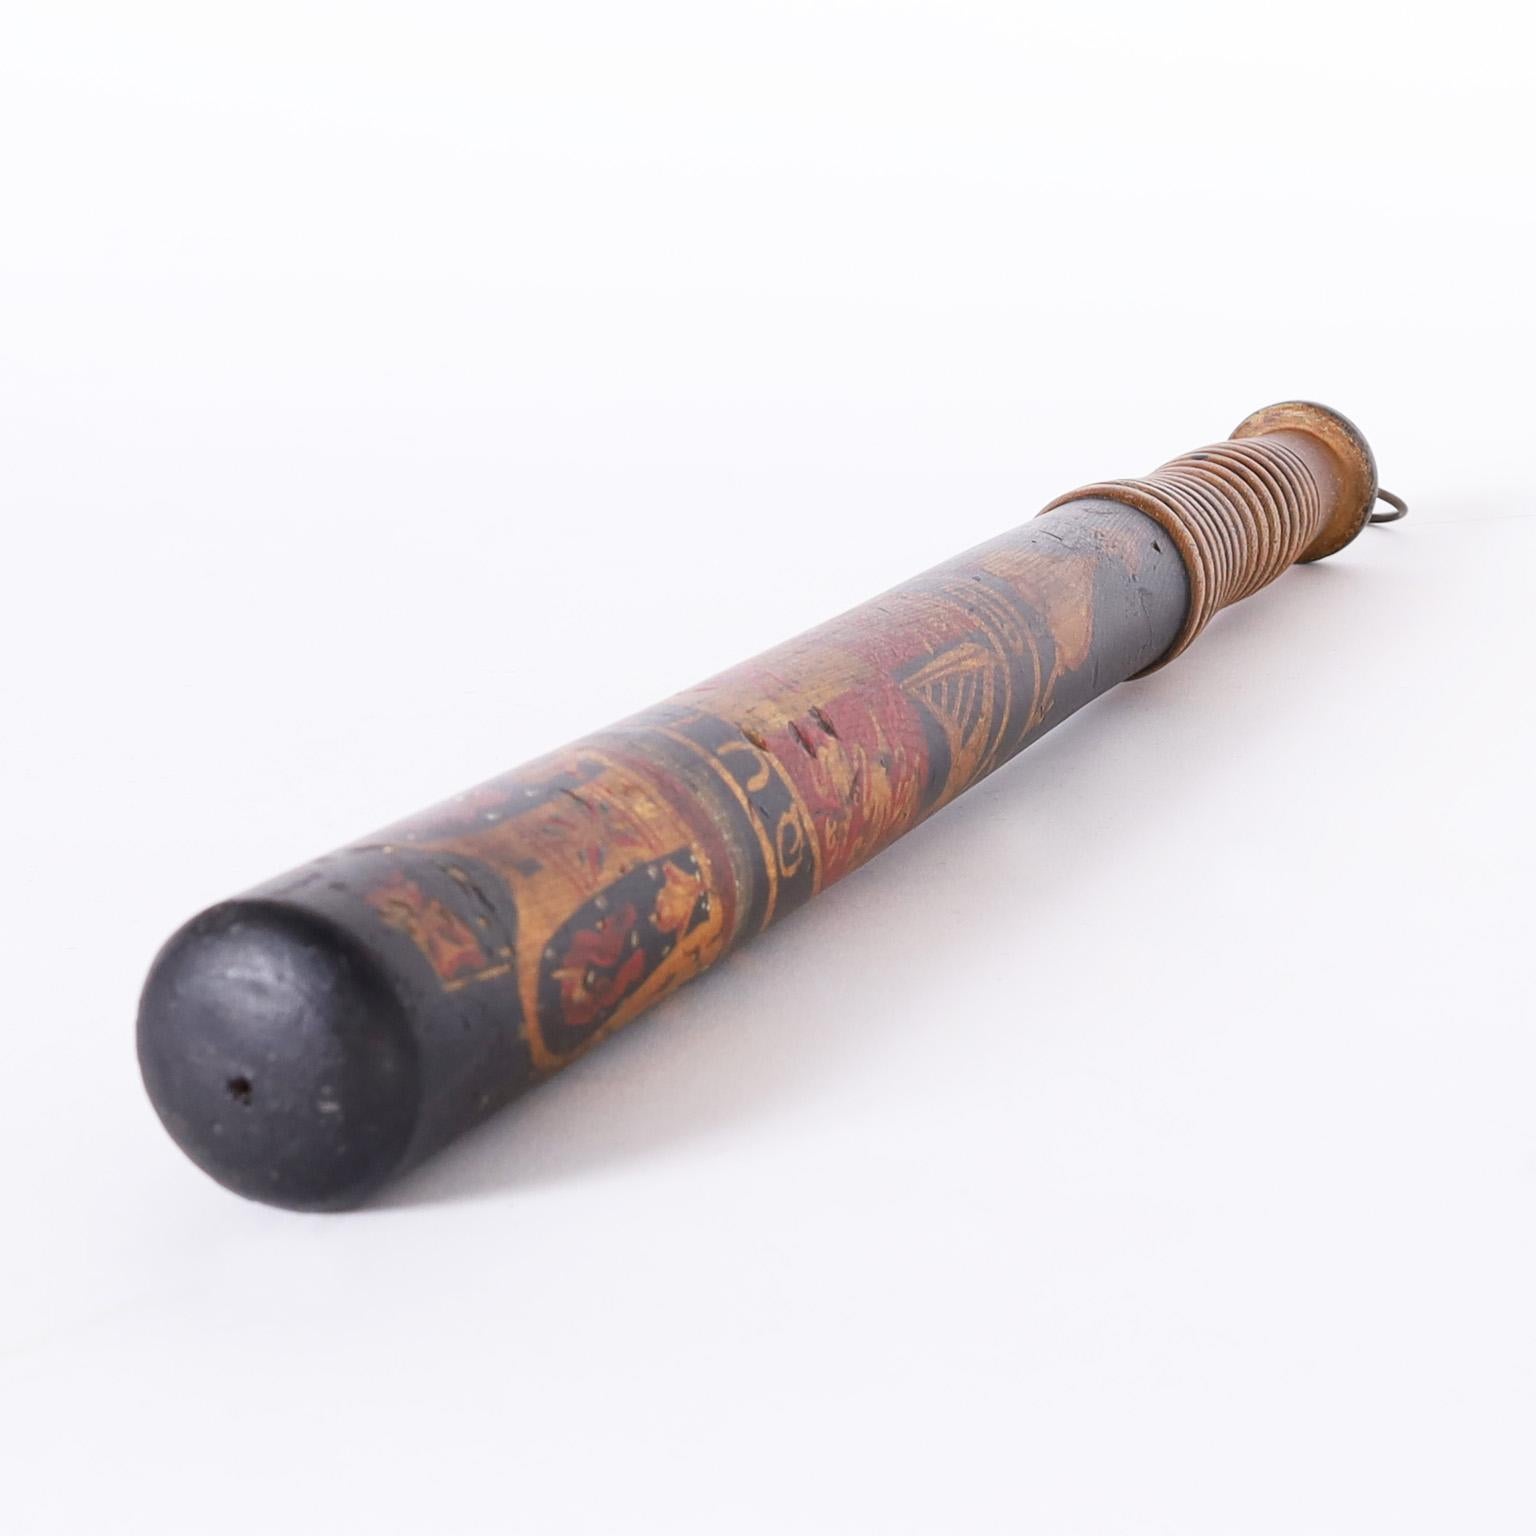 Wood Antique English Truncheon with the Garter Coat of Arms